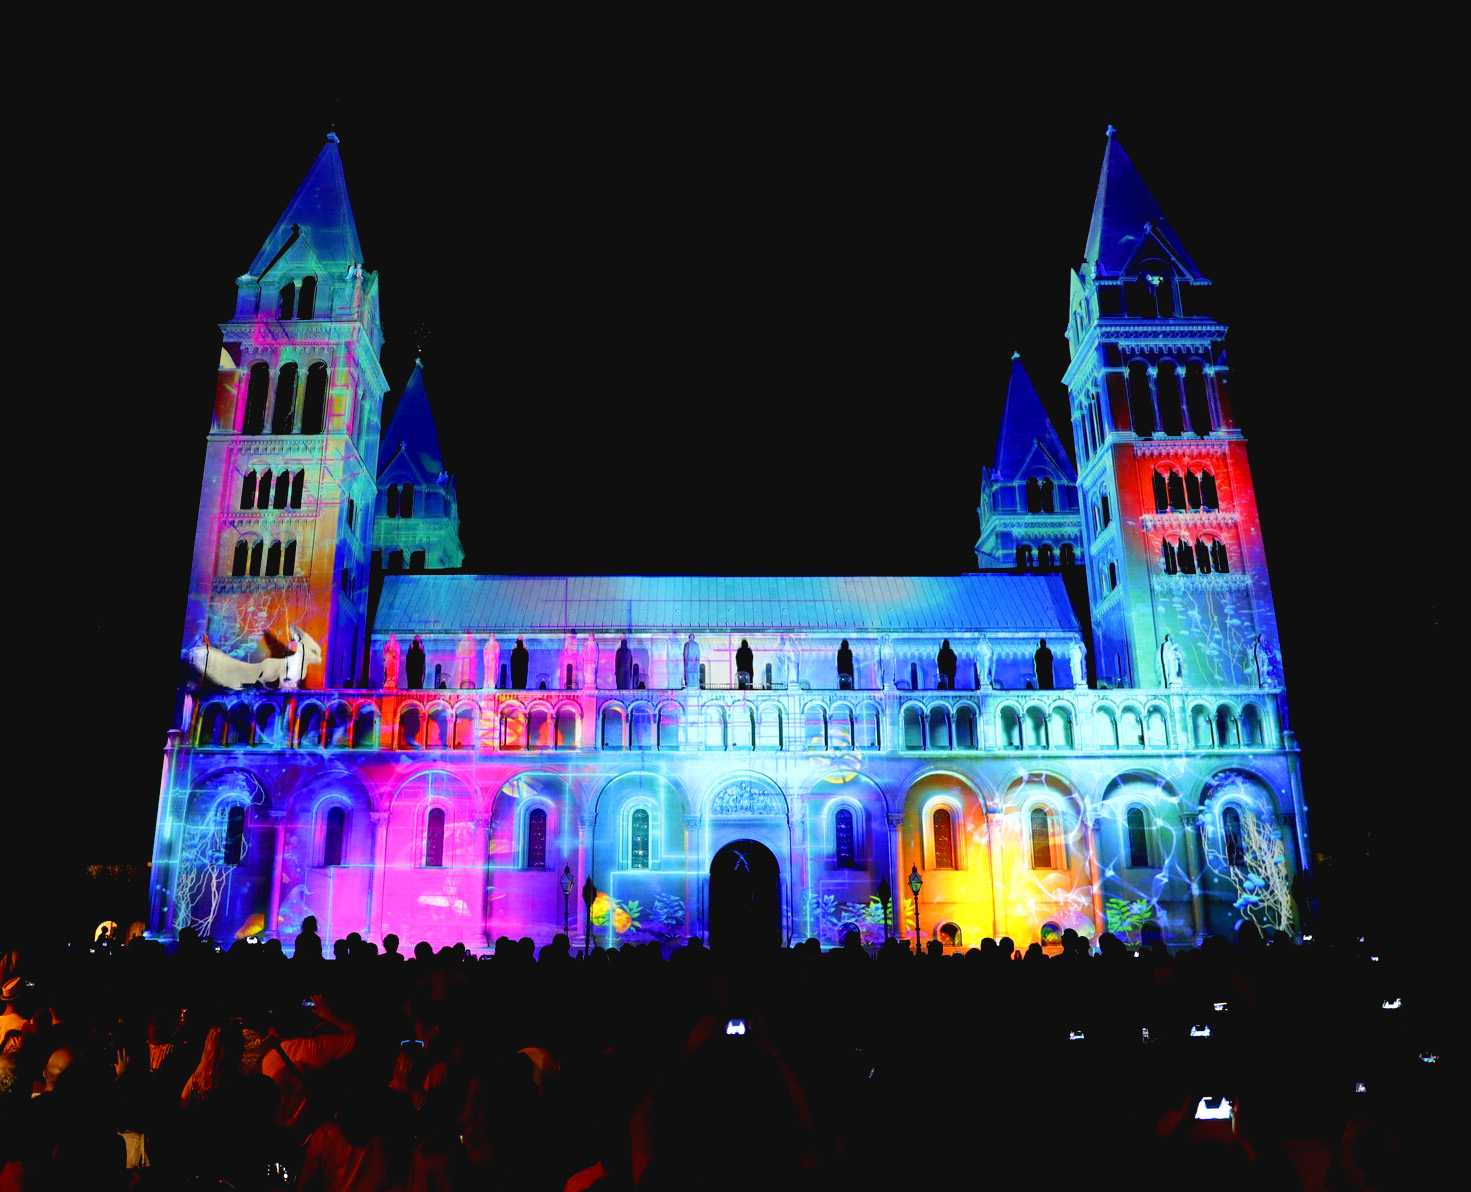 Watch: Zsolnay Light Festival in Hungary Attracts Over 100,000 Visitors